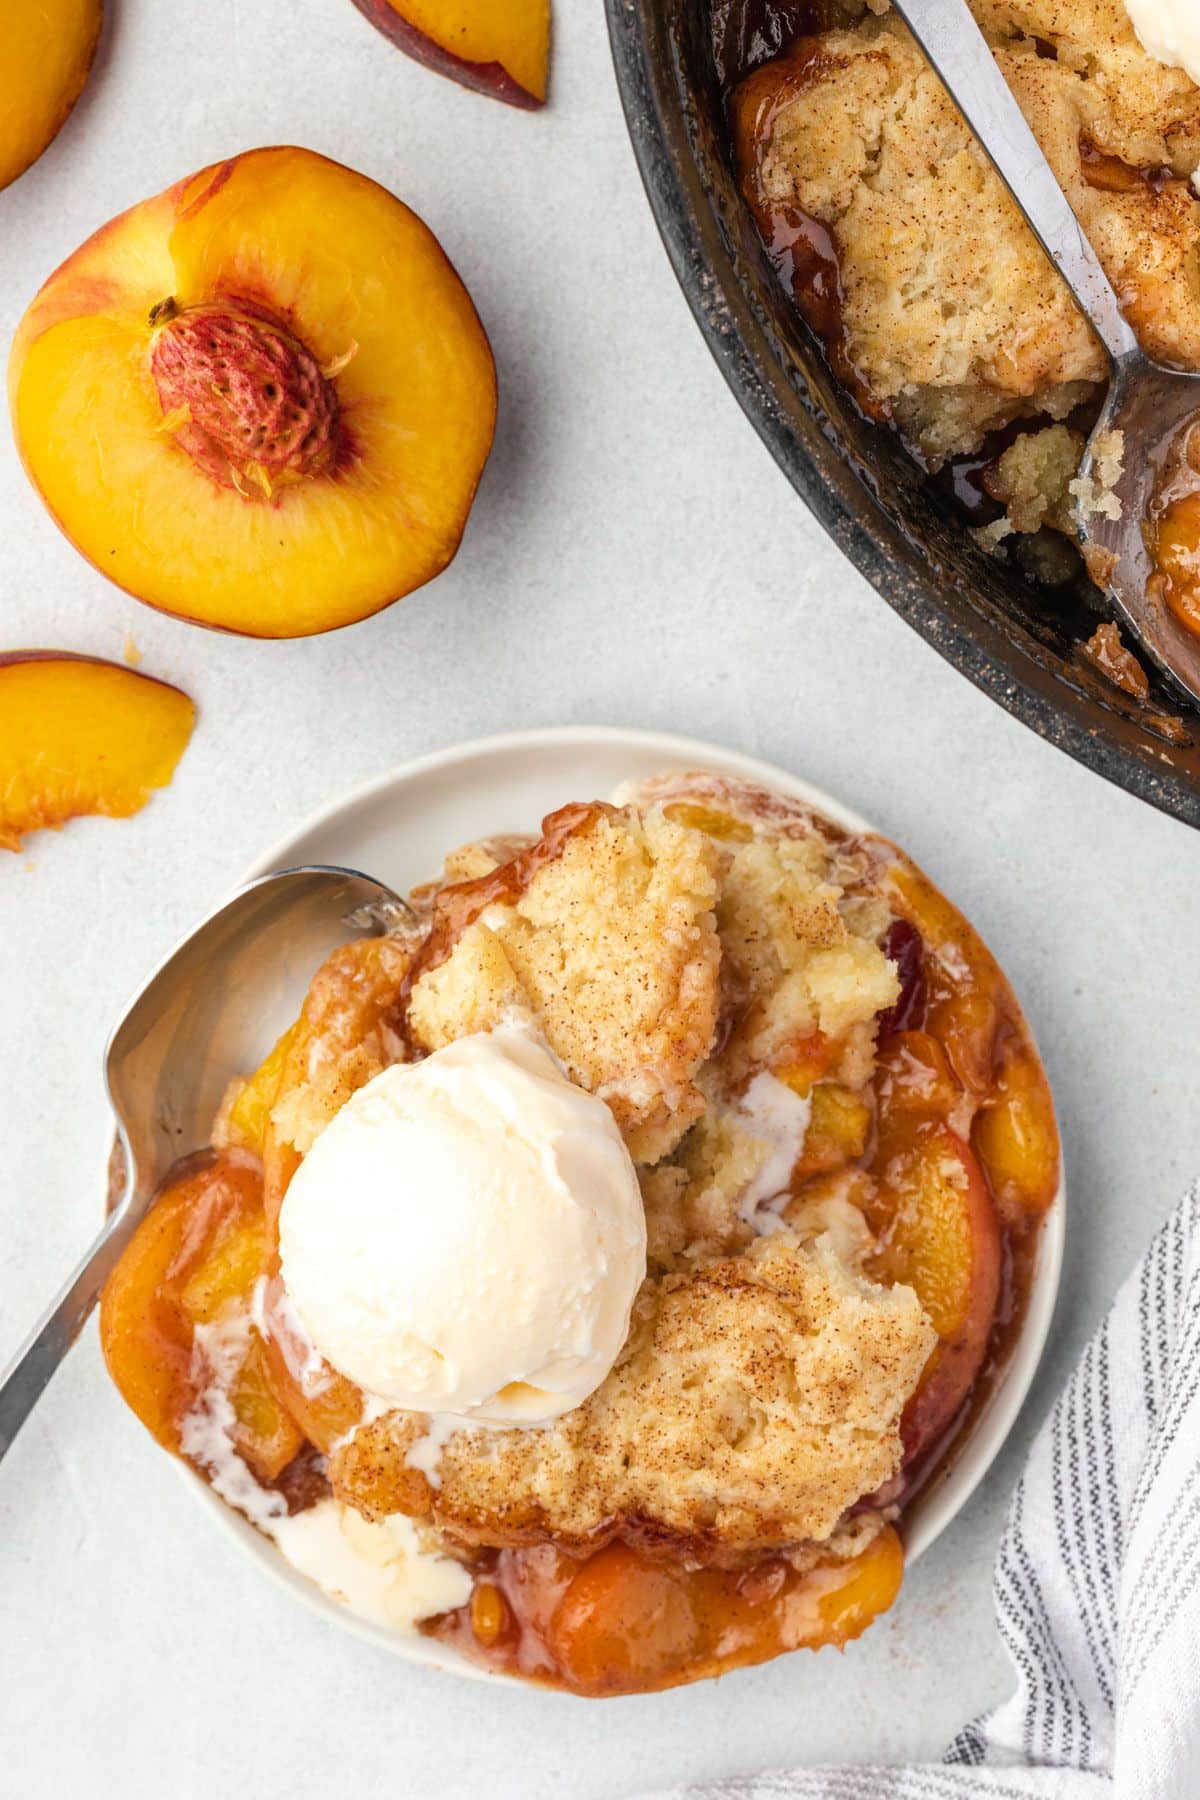 Peach cobbler served on a white plate with a scoop of ice cream on top.